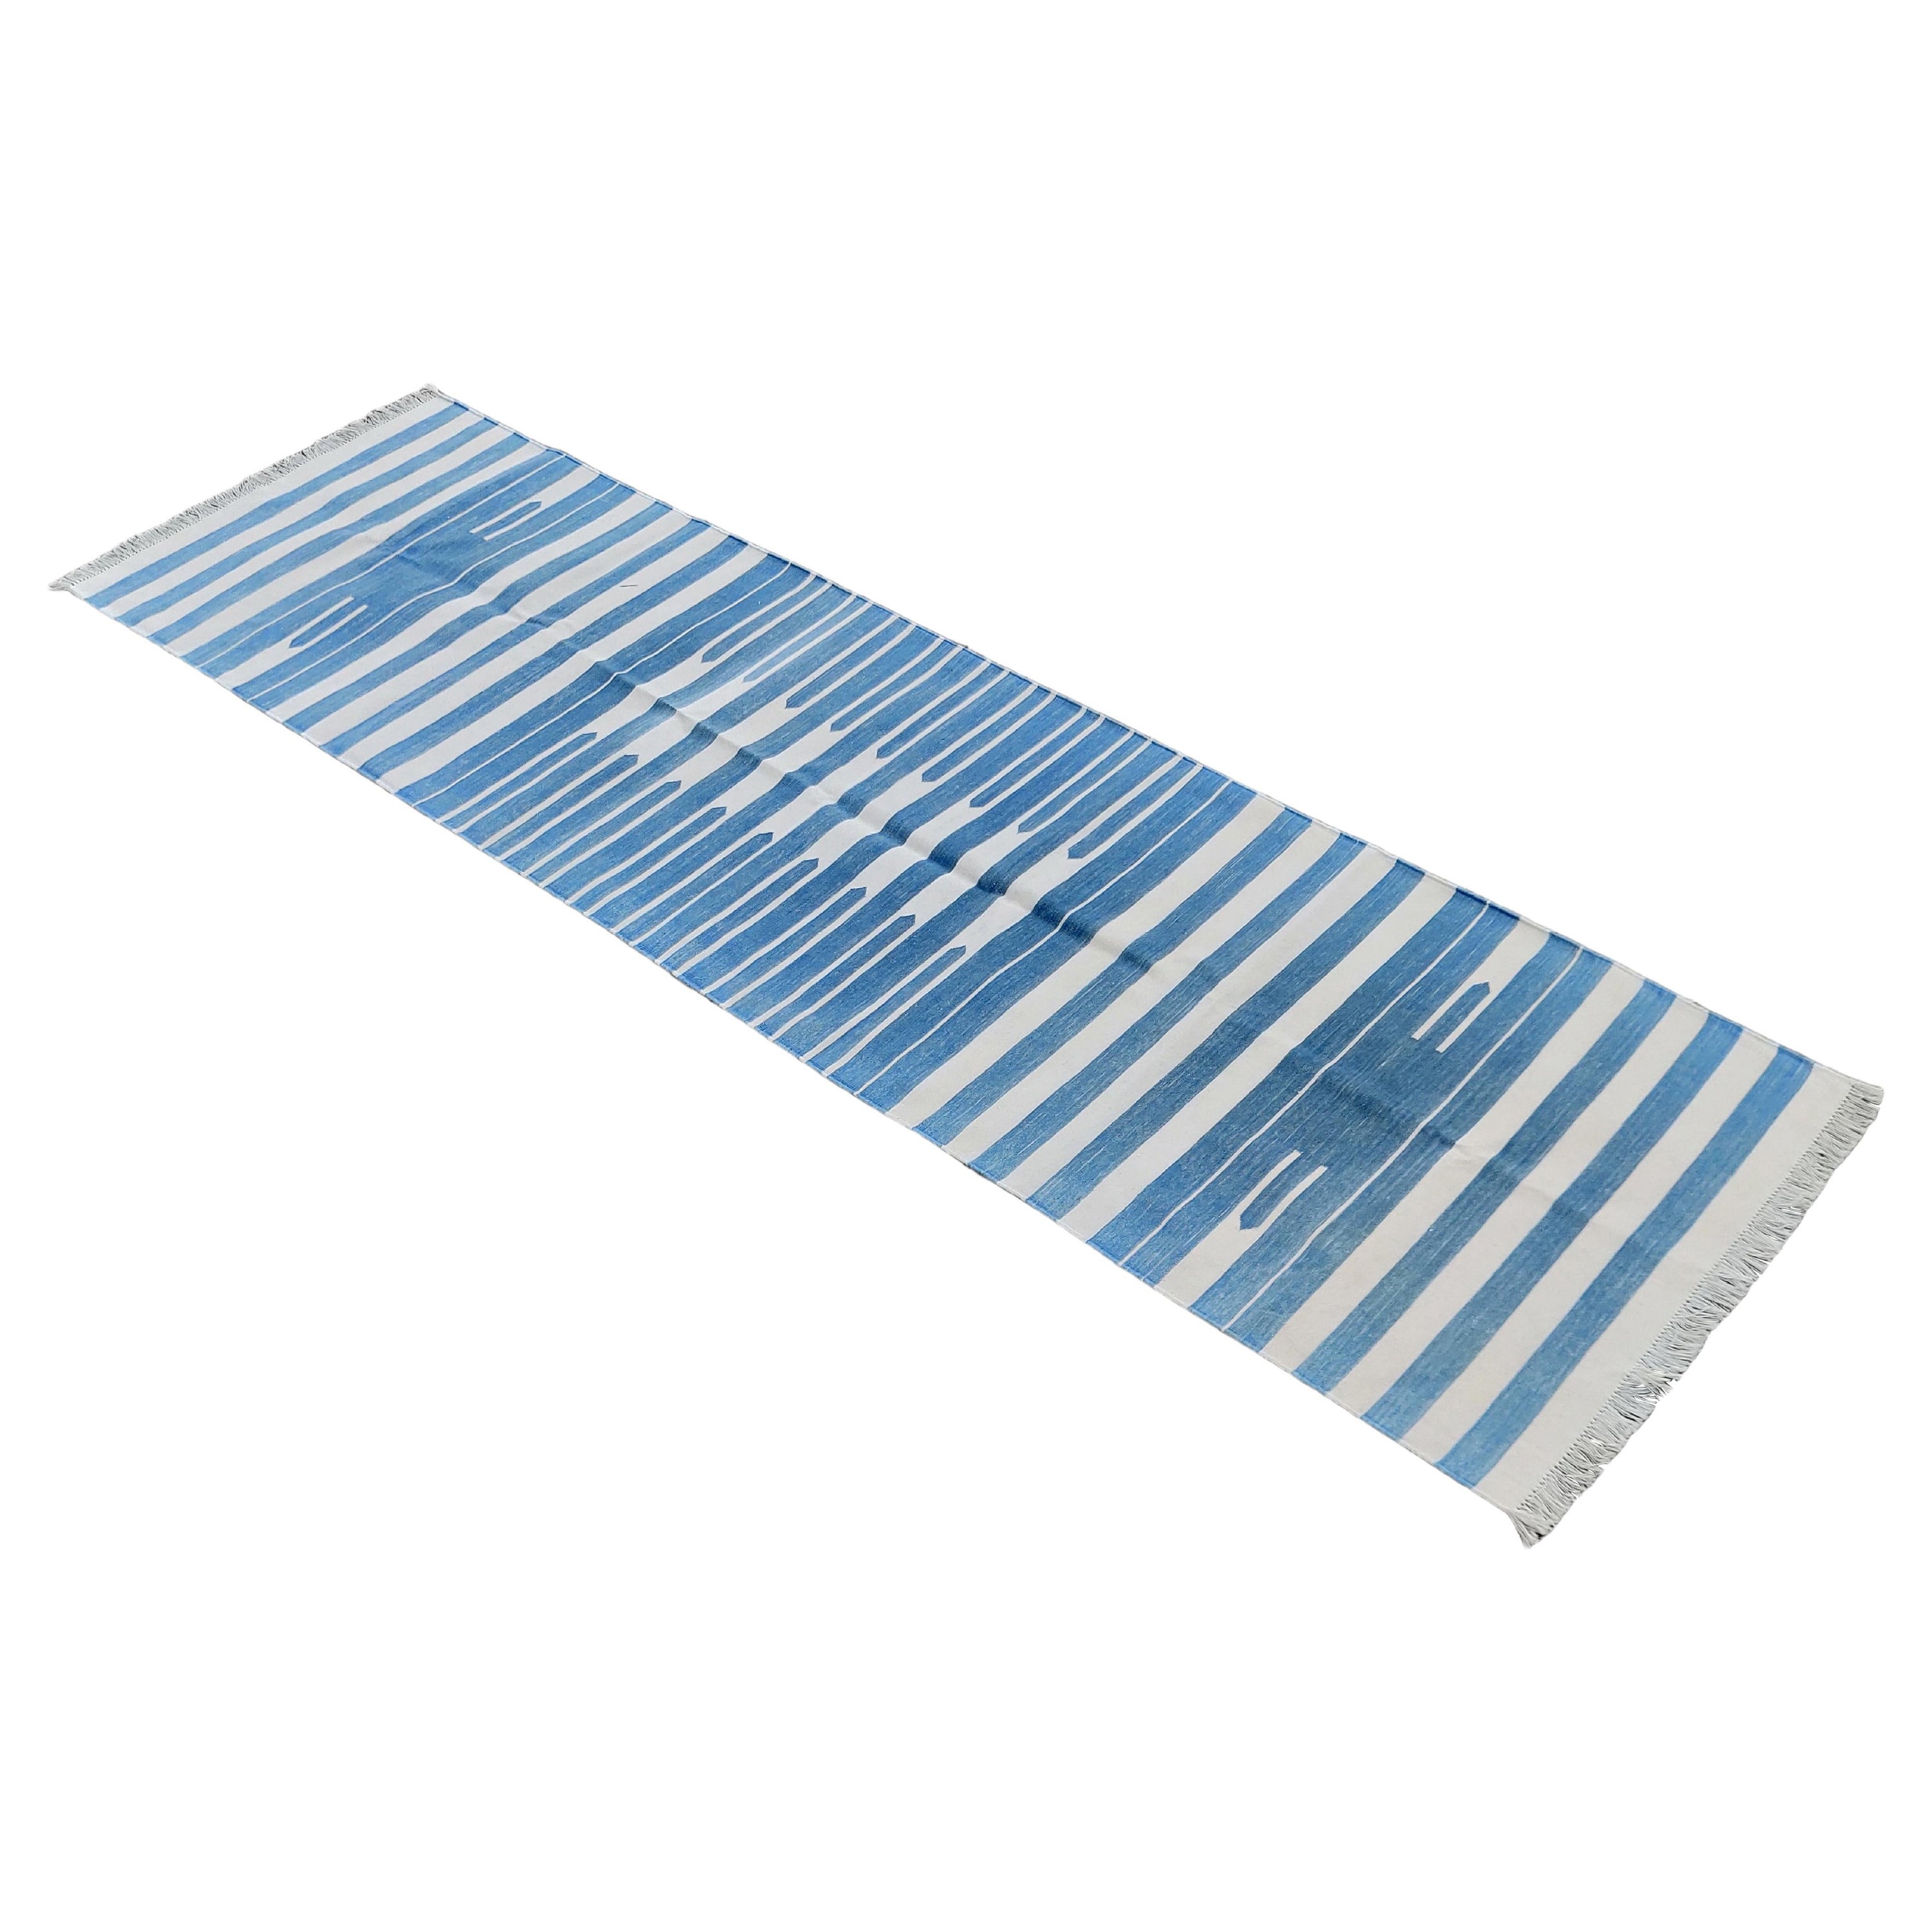 Handmade Cotton Area Flat Weave Runner, 3x8 Blue And White Striped Dhurrie Rug For Sale